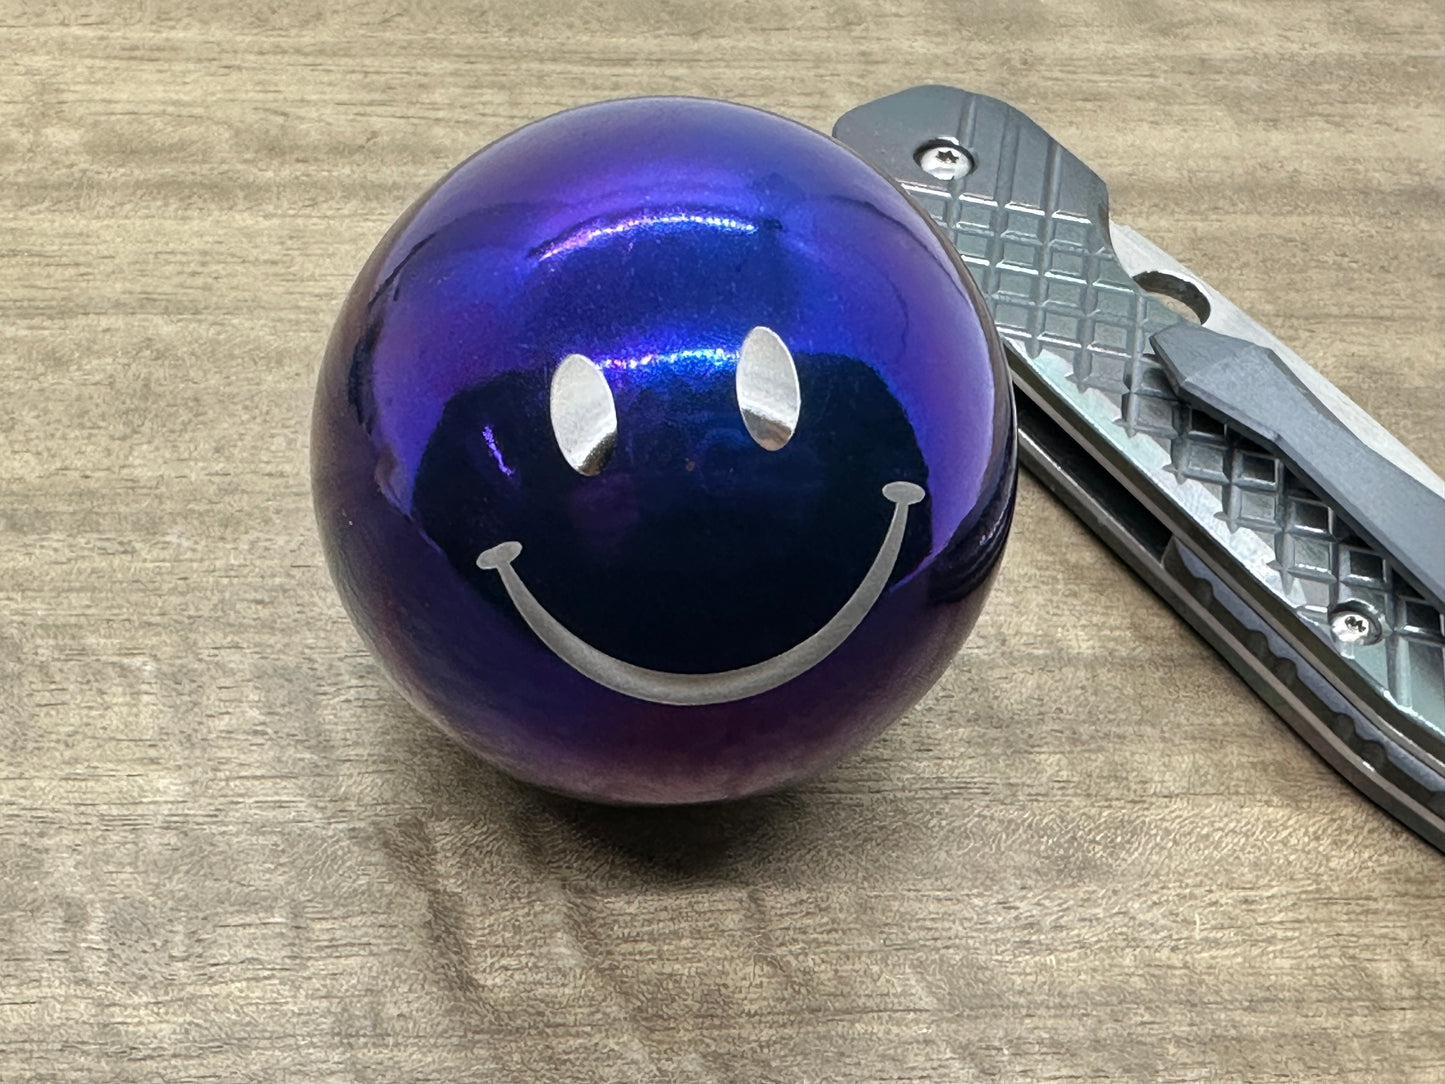 2.15" Giga SMILEY Solid Flamed Titanium SPHERE +Glow in the dark stand